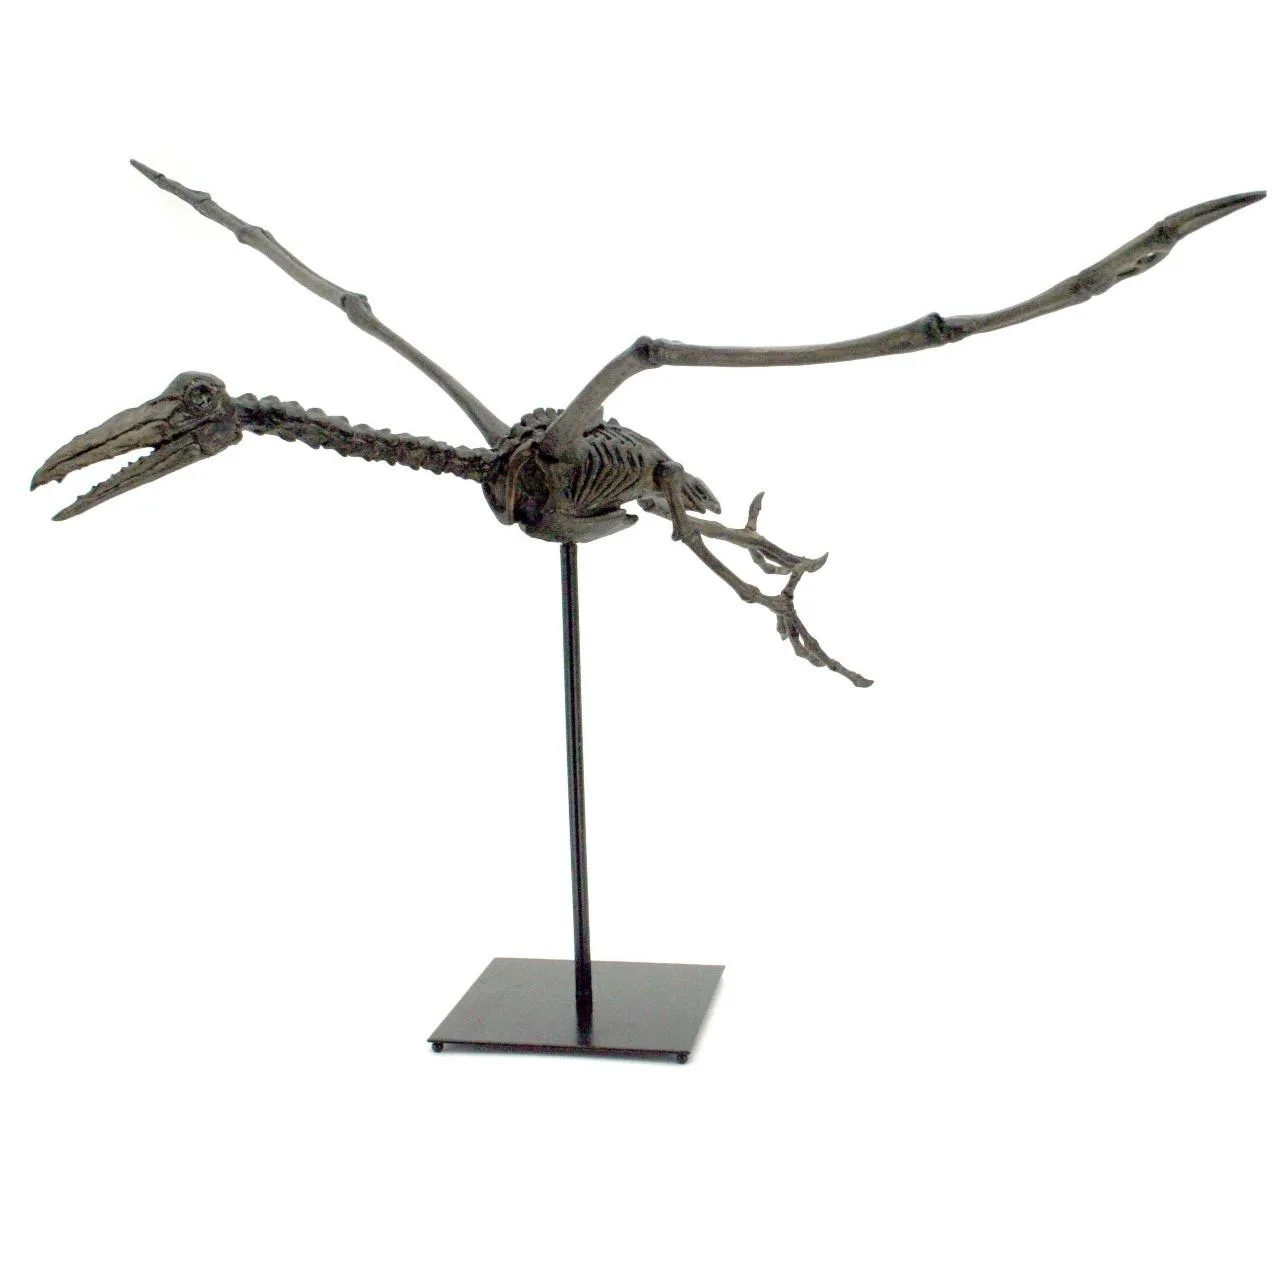 Pterodactylus Life Size Replica Flying Male Open Mouth Dinosaur